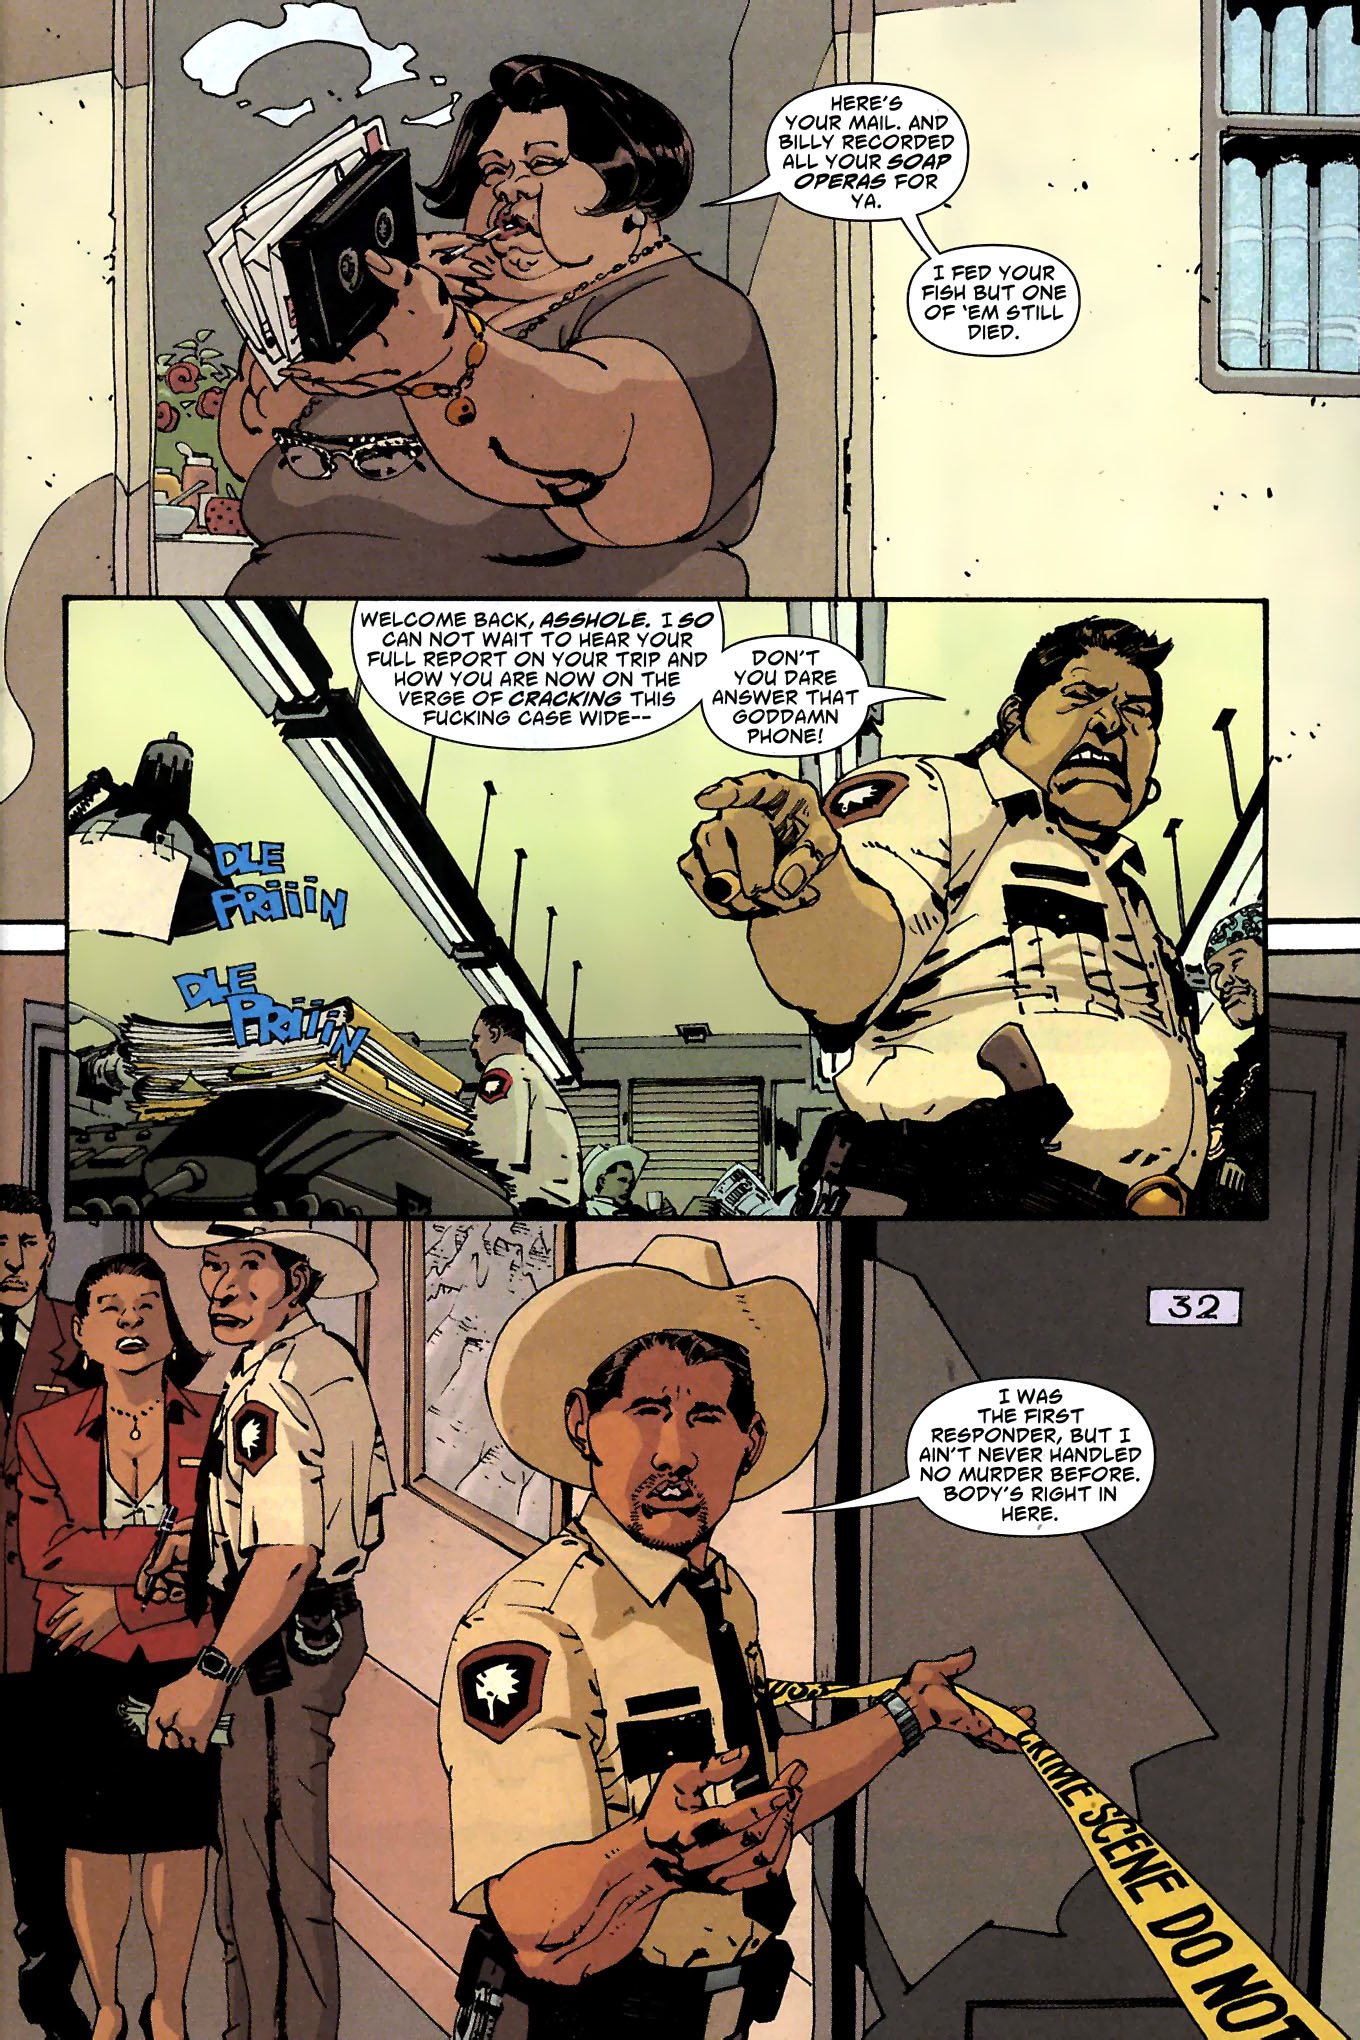 Scalped #28 - I'll Never Get Outta This World Alive: High Lonesome, Part Four of Five 